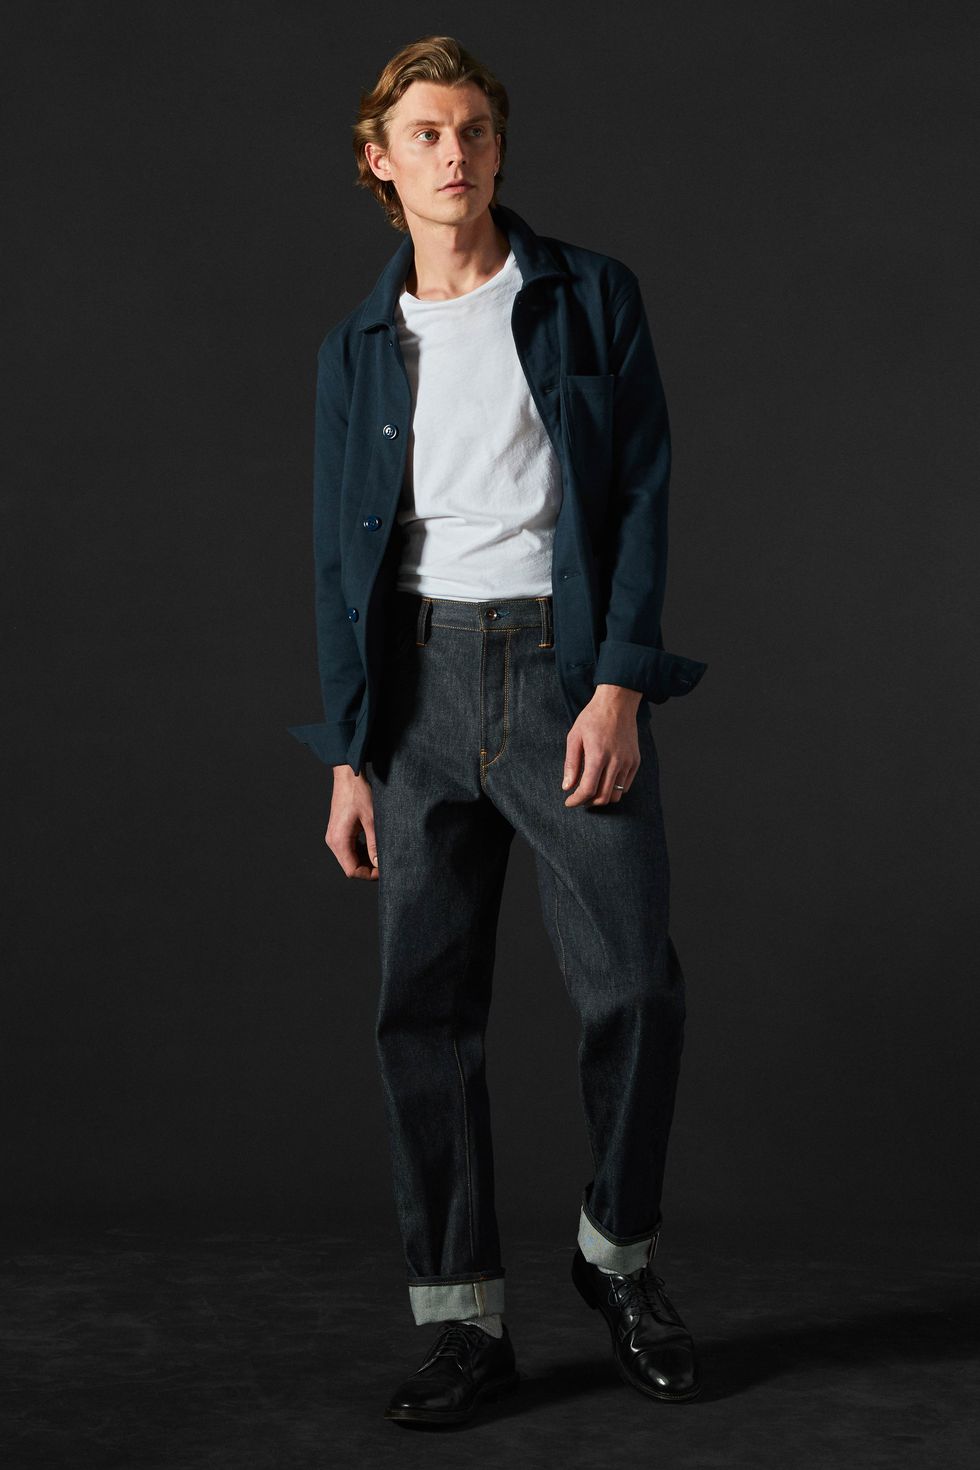 these rigid, madeinamerica jeans from the small batch collection feature a stovepipe leg and higher rise